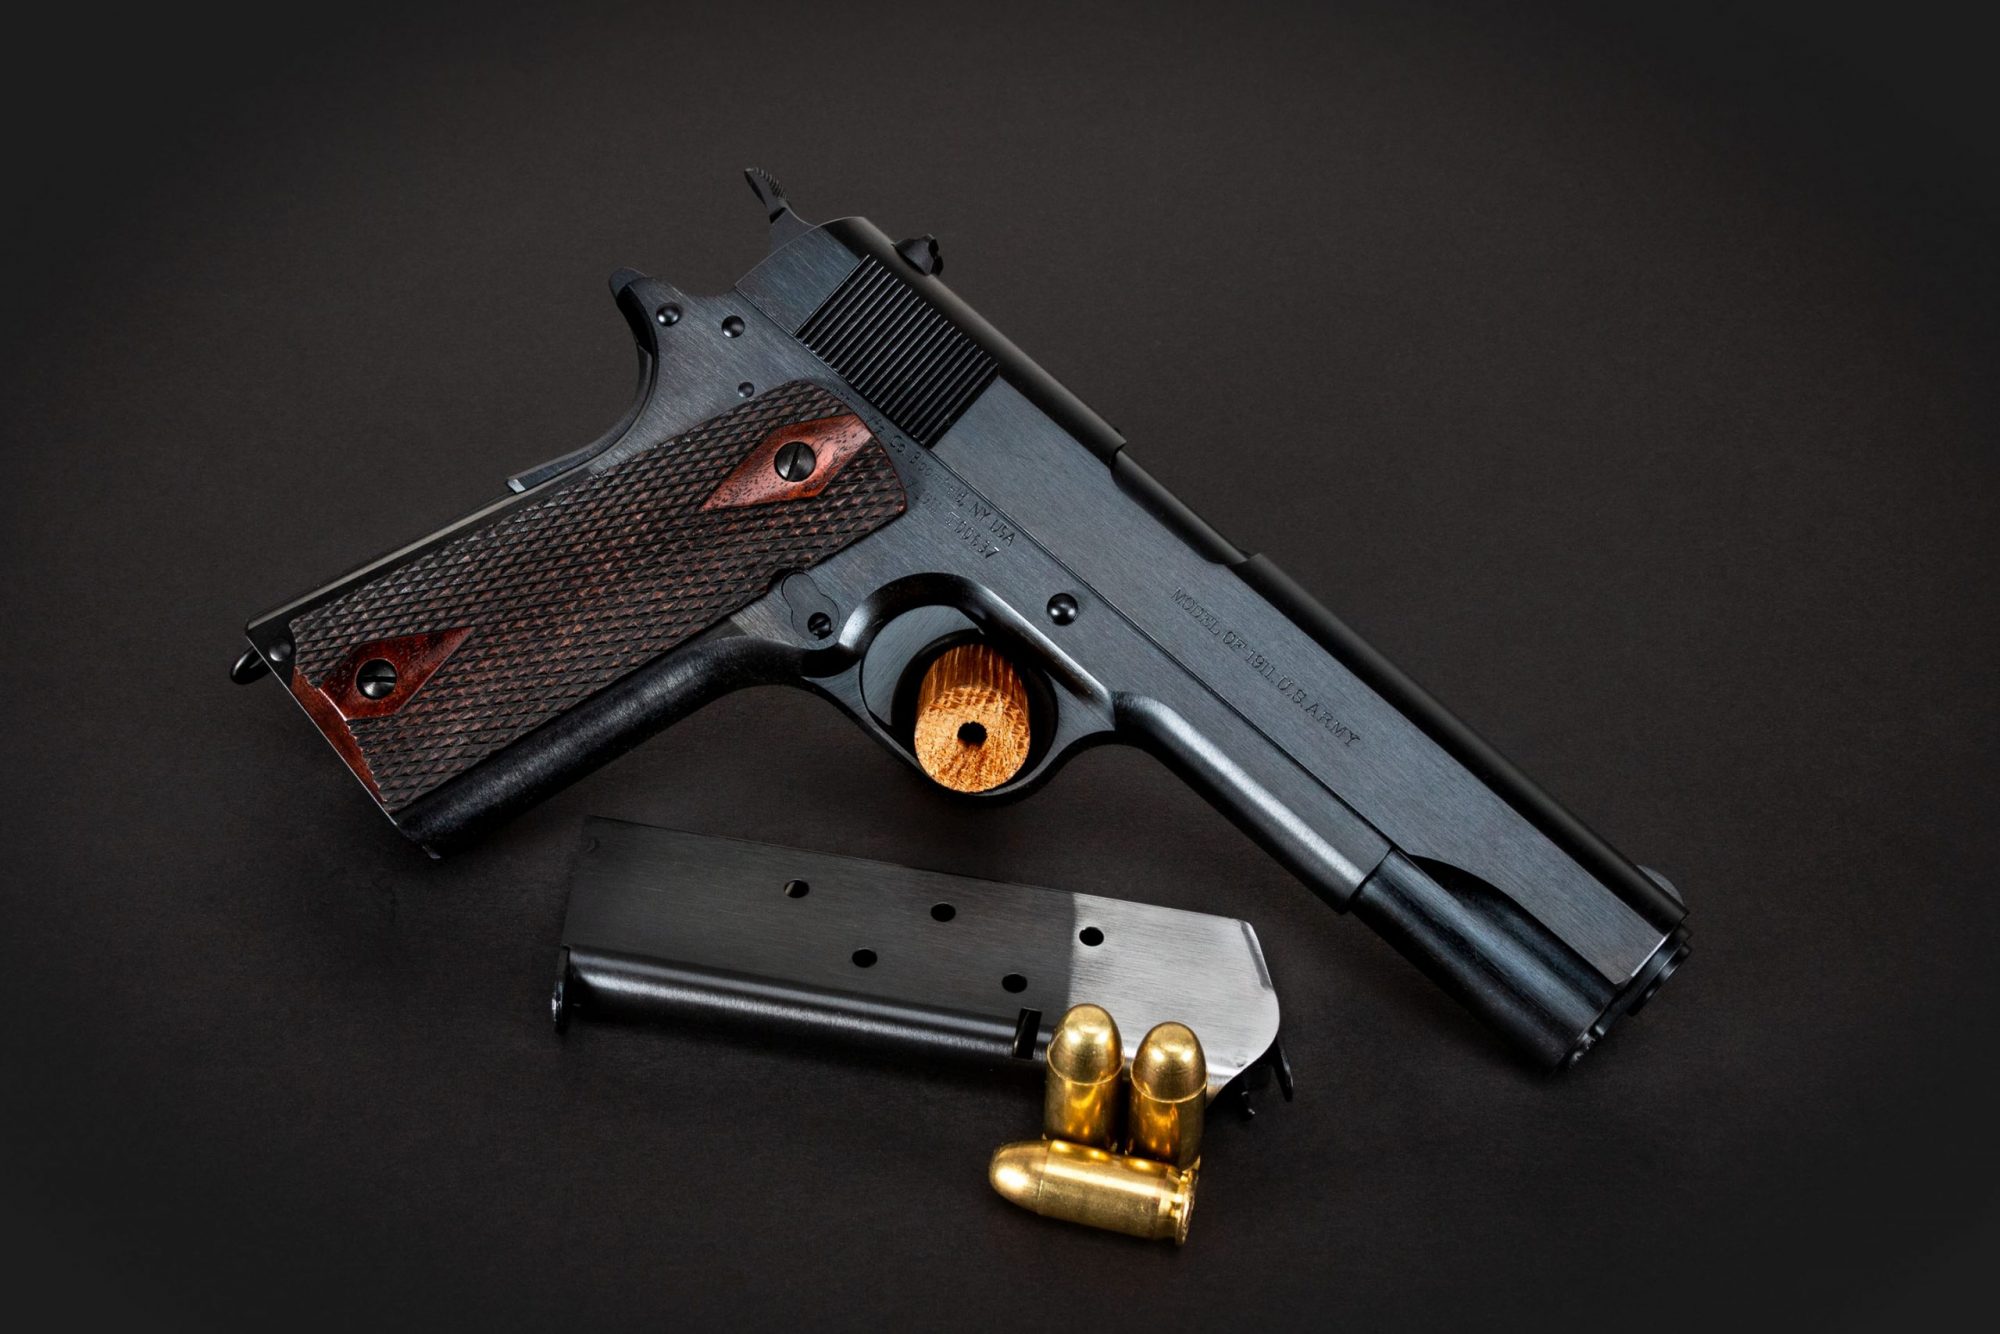 Photo of a Turnbull Model 1911 Black Army, a WWI-era Model 1911 reproduction built by Turnbull Restoration the experts of classic Model 1911 restoration